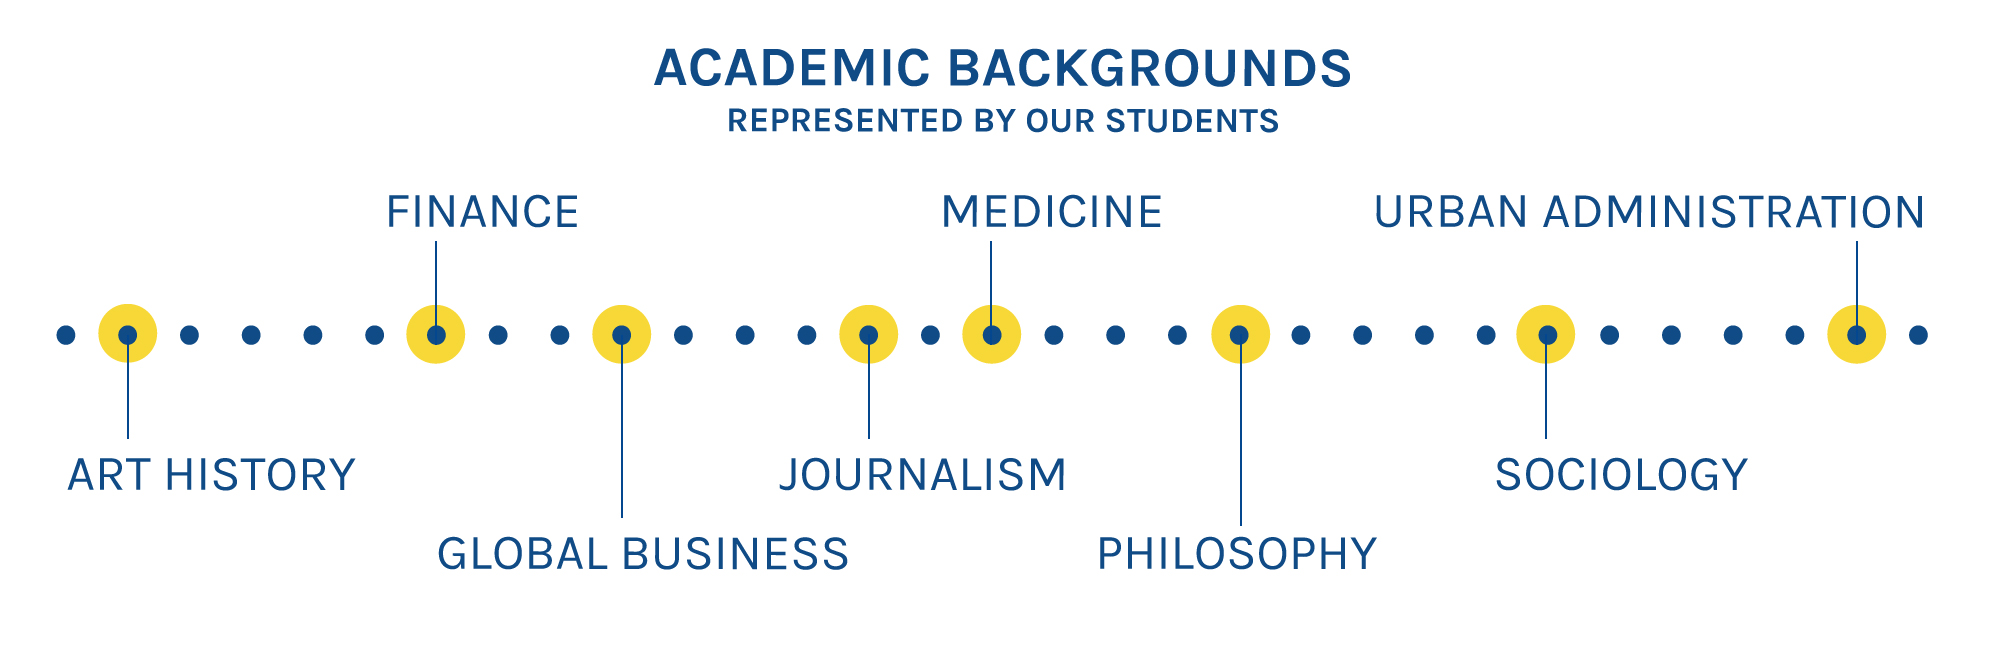 Infographic with blue text that reads: Variety of Academic Backgrounds and includes a horizontal bar and several topics emanating out from it: Art History, Finance, Global Business, Journalism, Medicine, Philosophy, Sociology, Urban Administration